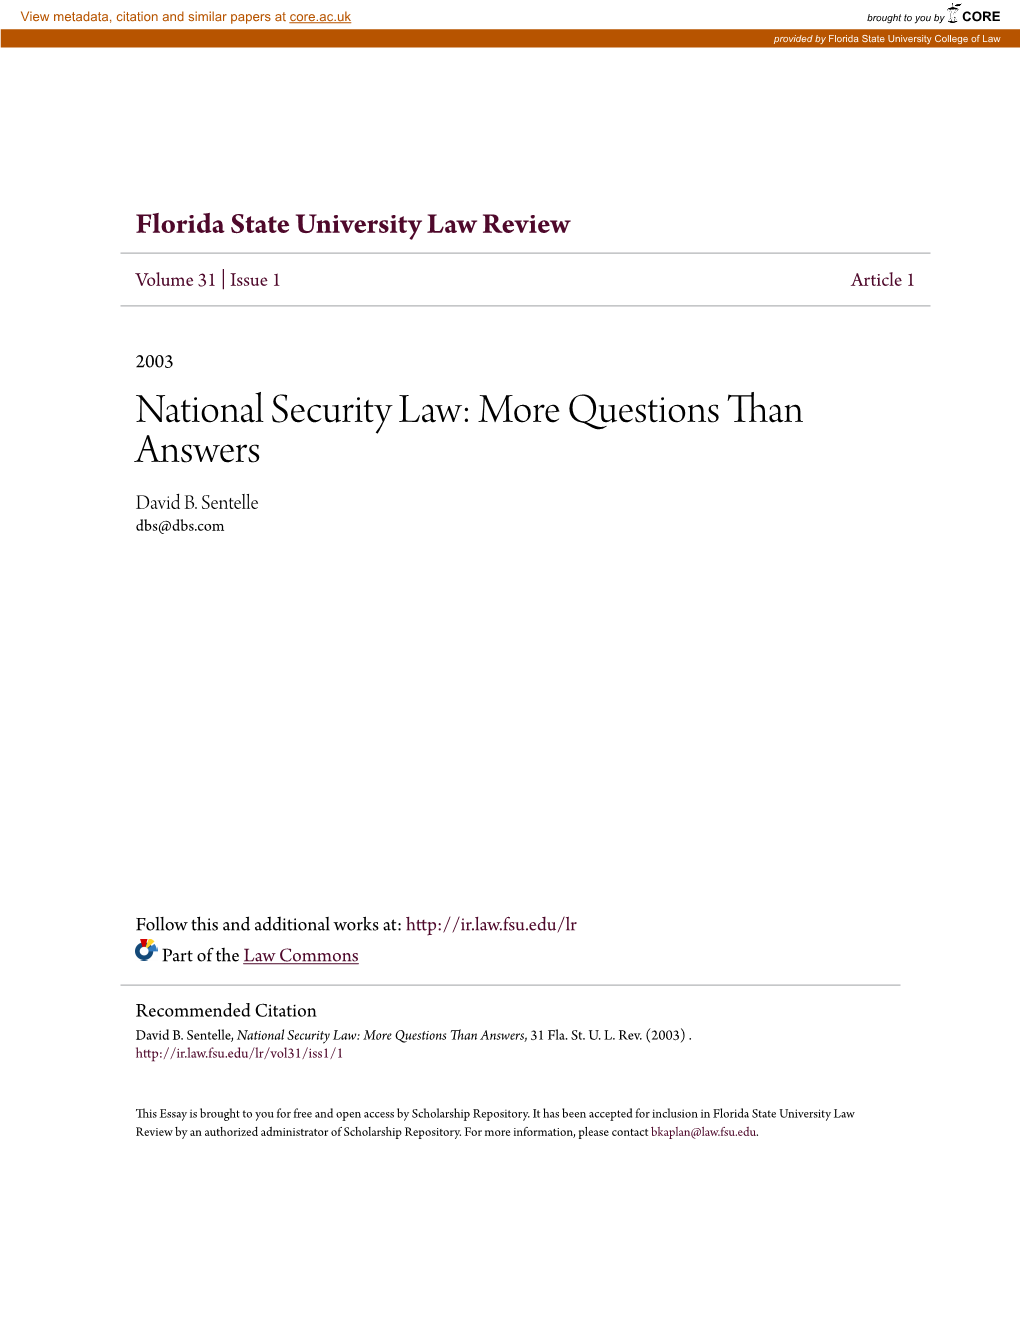 National Security Law: More Questions Than Answers David B